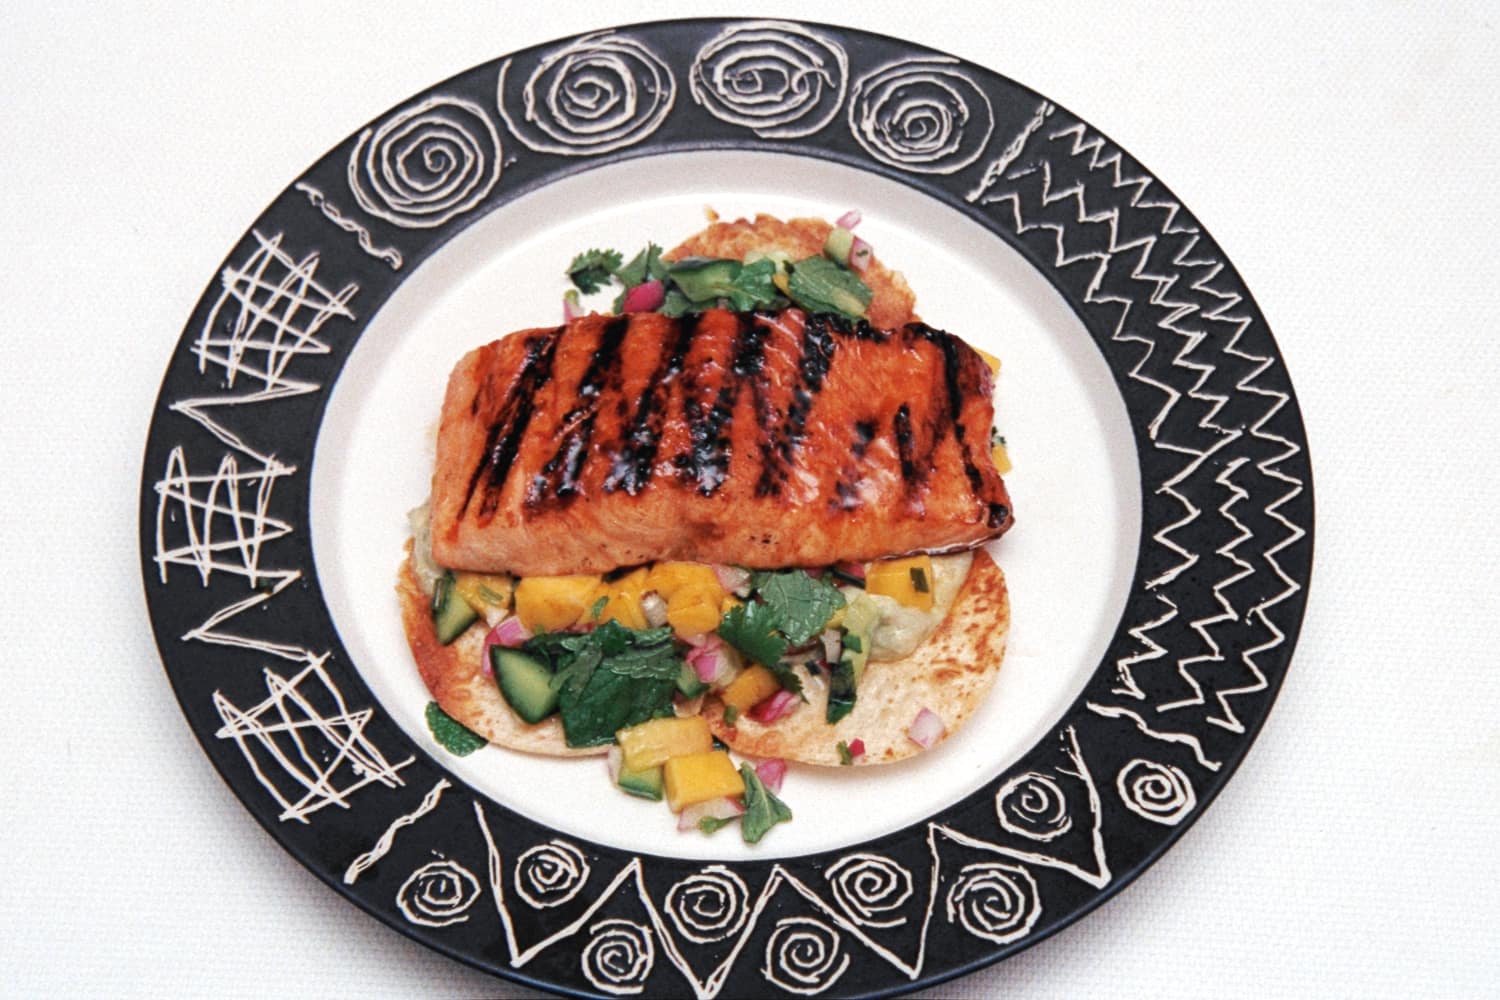 Grilled Salmon plated